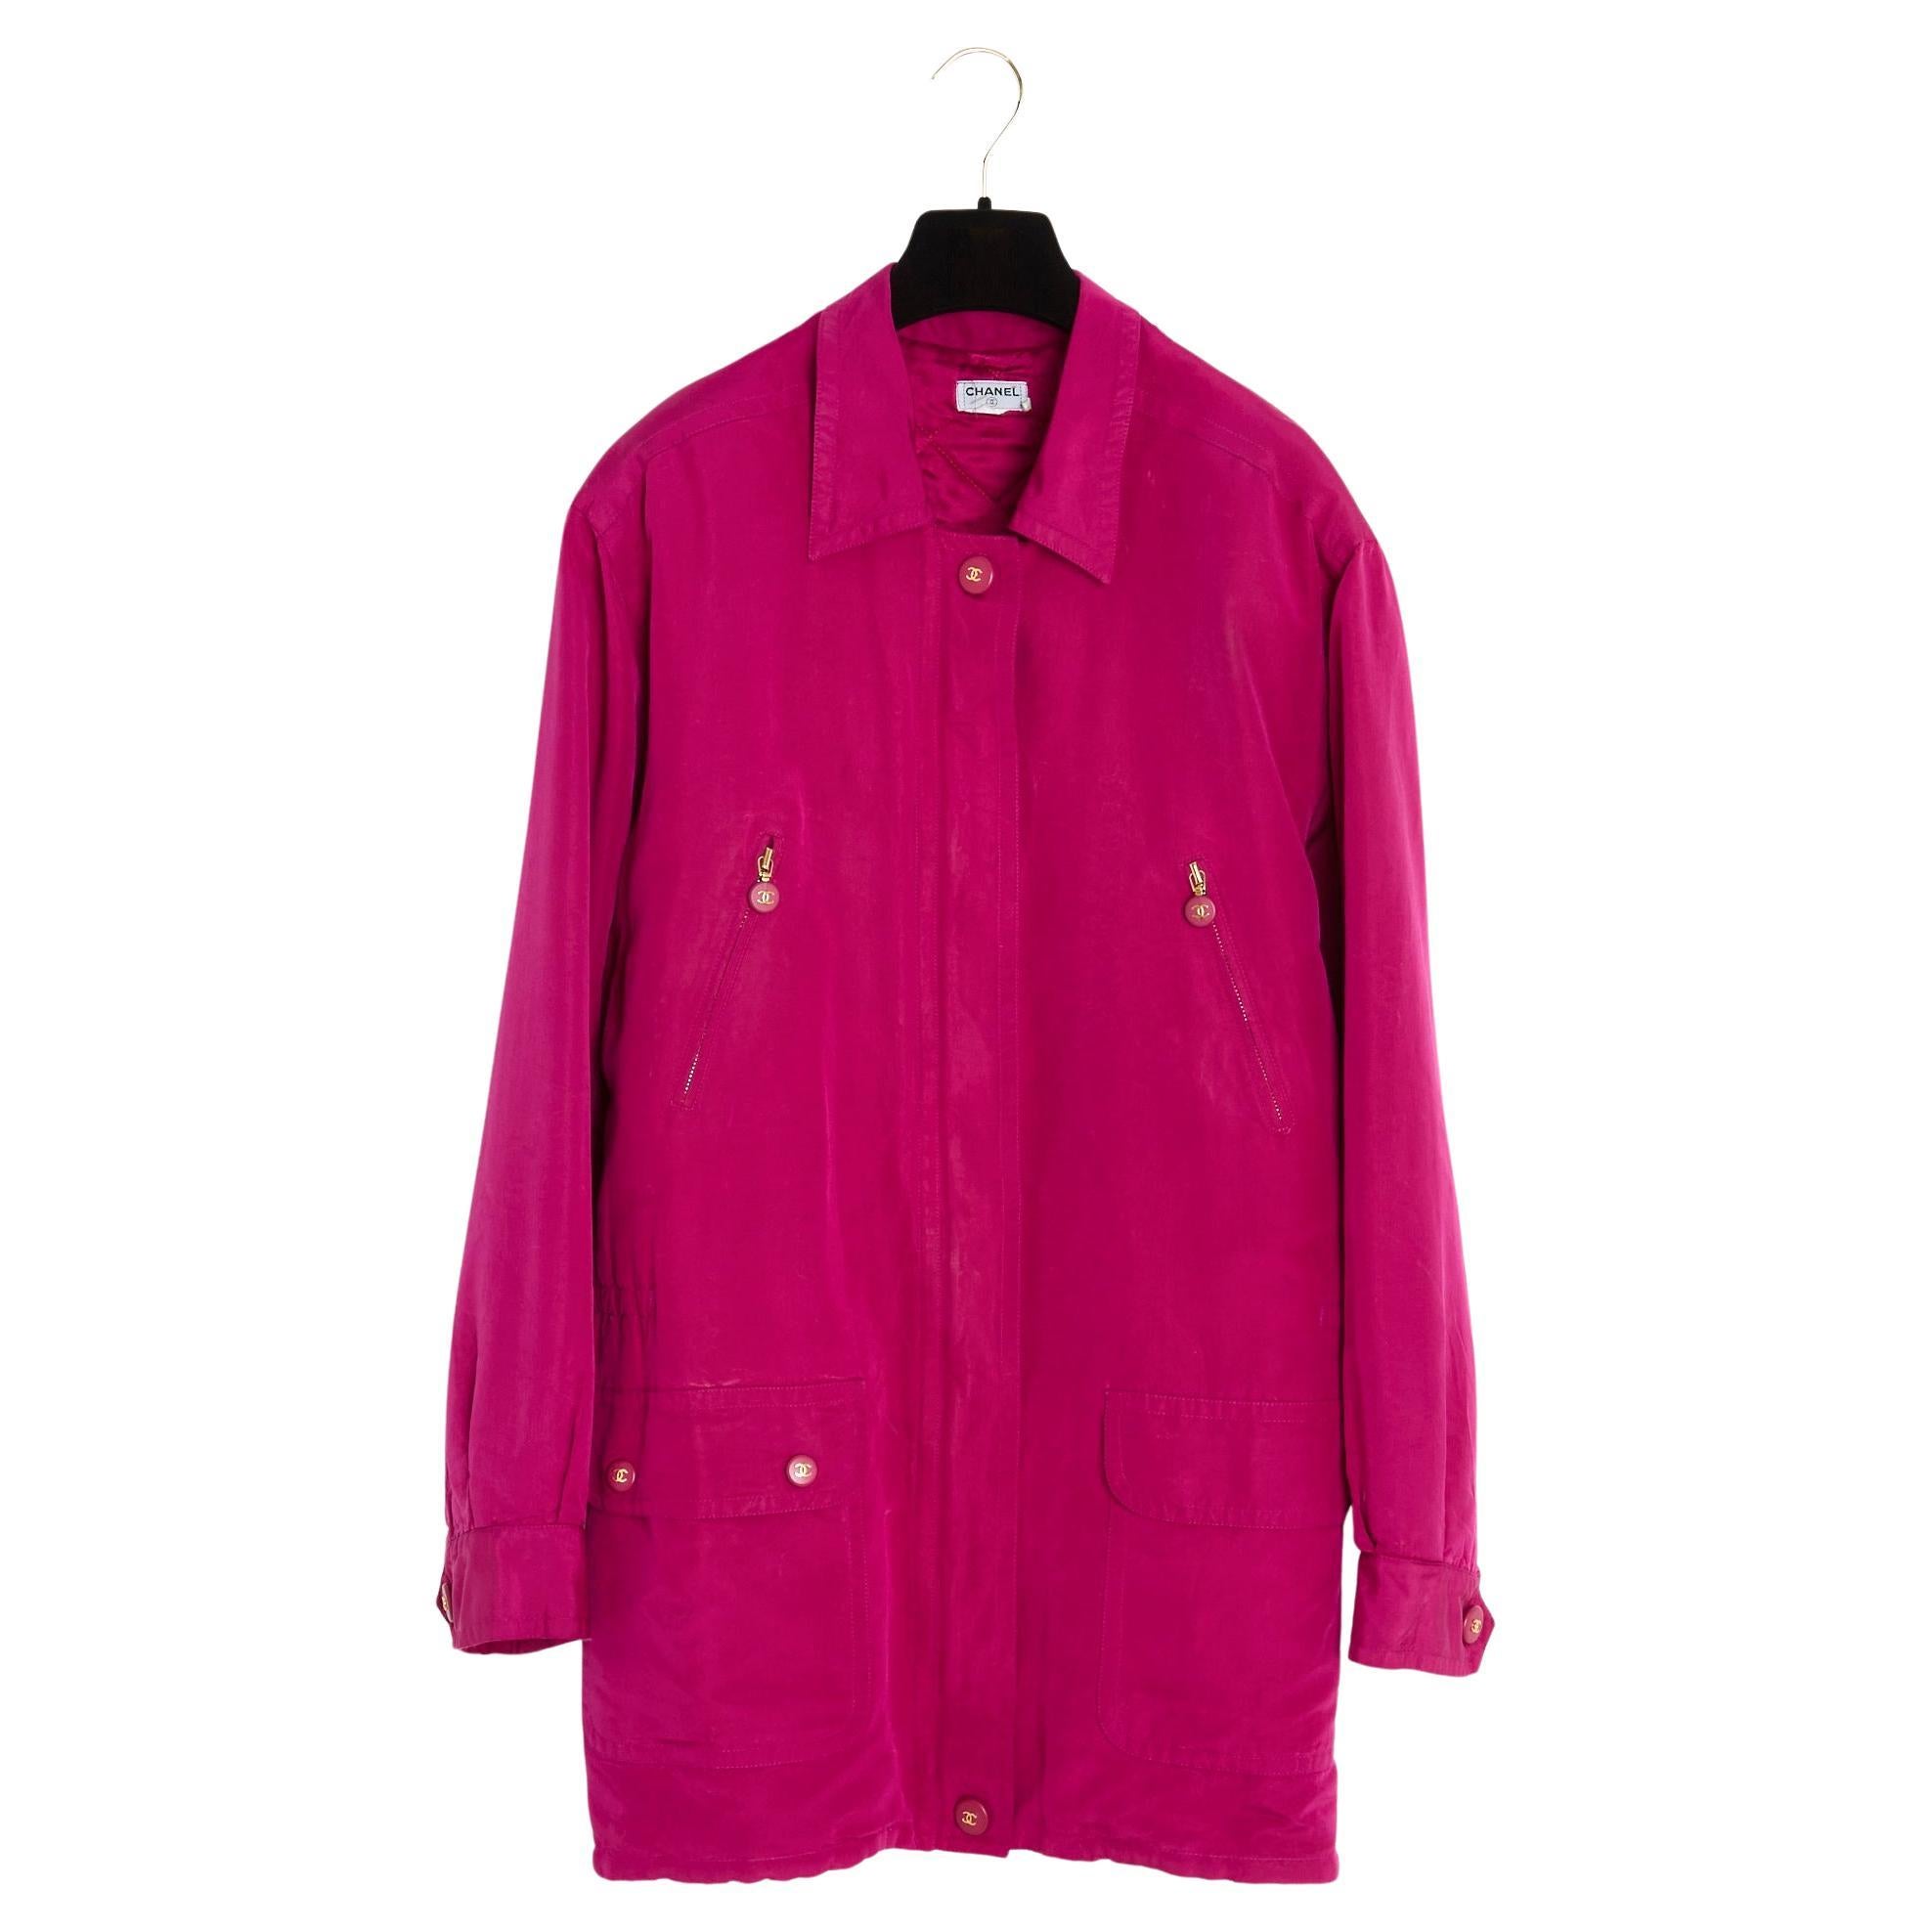 FW1994 Chanel Pink Silk Oversize Parka US8 to 12 For Sale